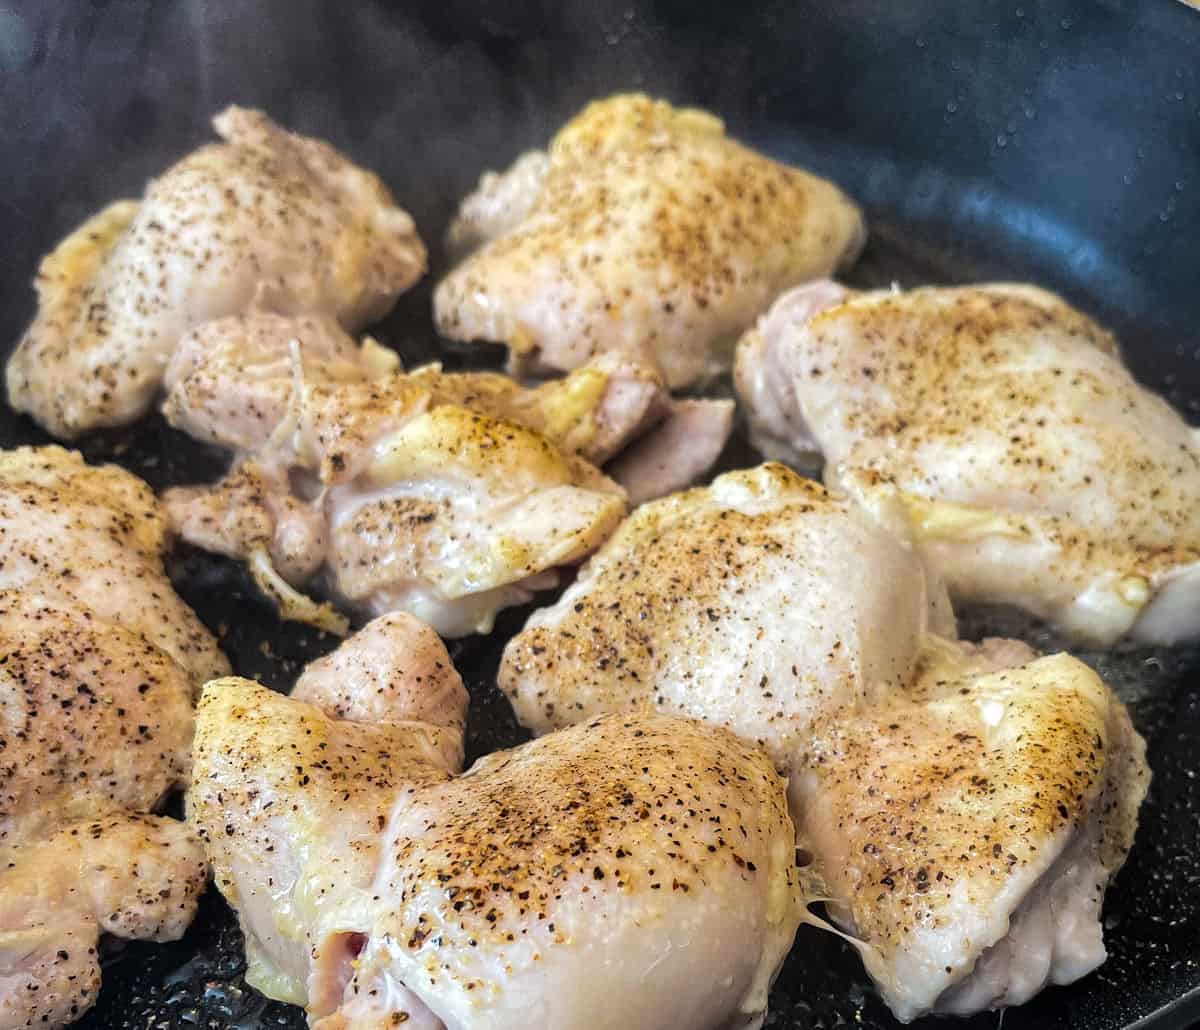 6-7 chicken thighs seasoned with black pepper cooking in a black pan greased with oil. steam can be pictured, indicating it is actively cooking in a 2nd step prep for Creamy Tuscan Chicken Recipe